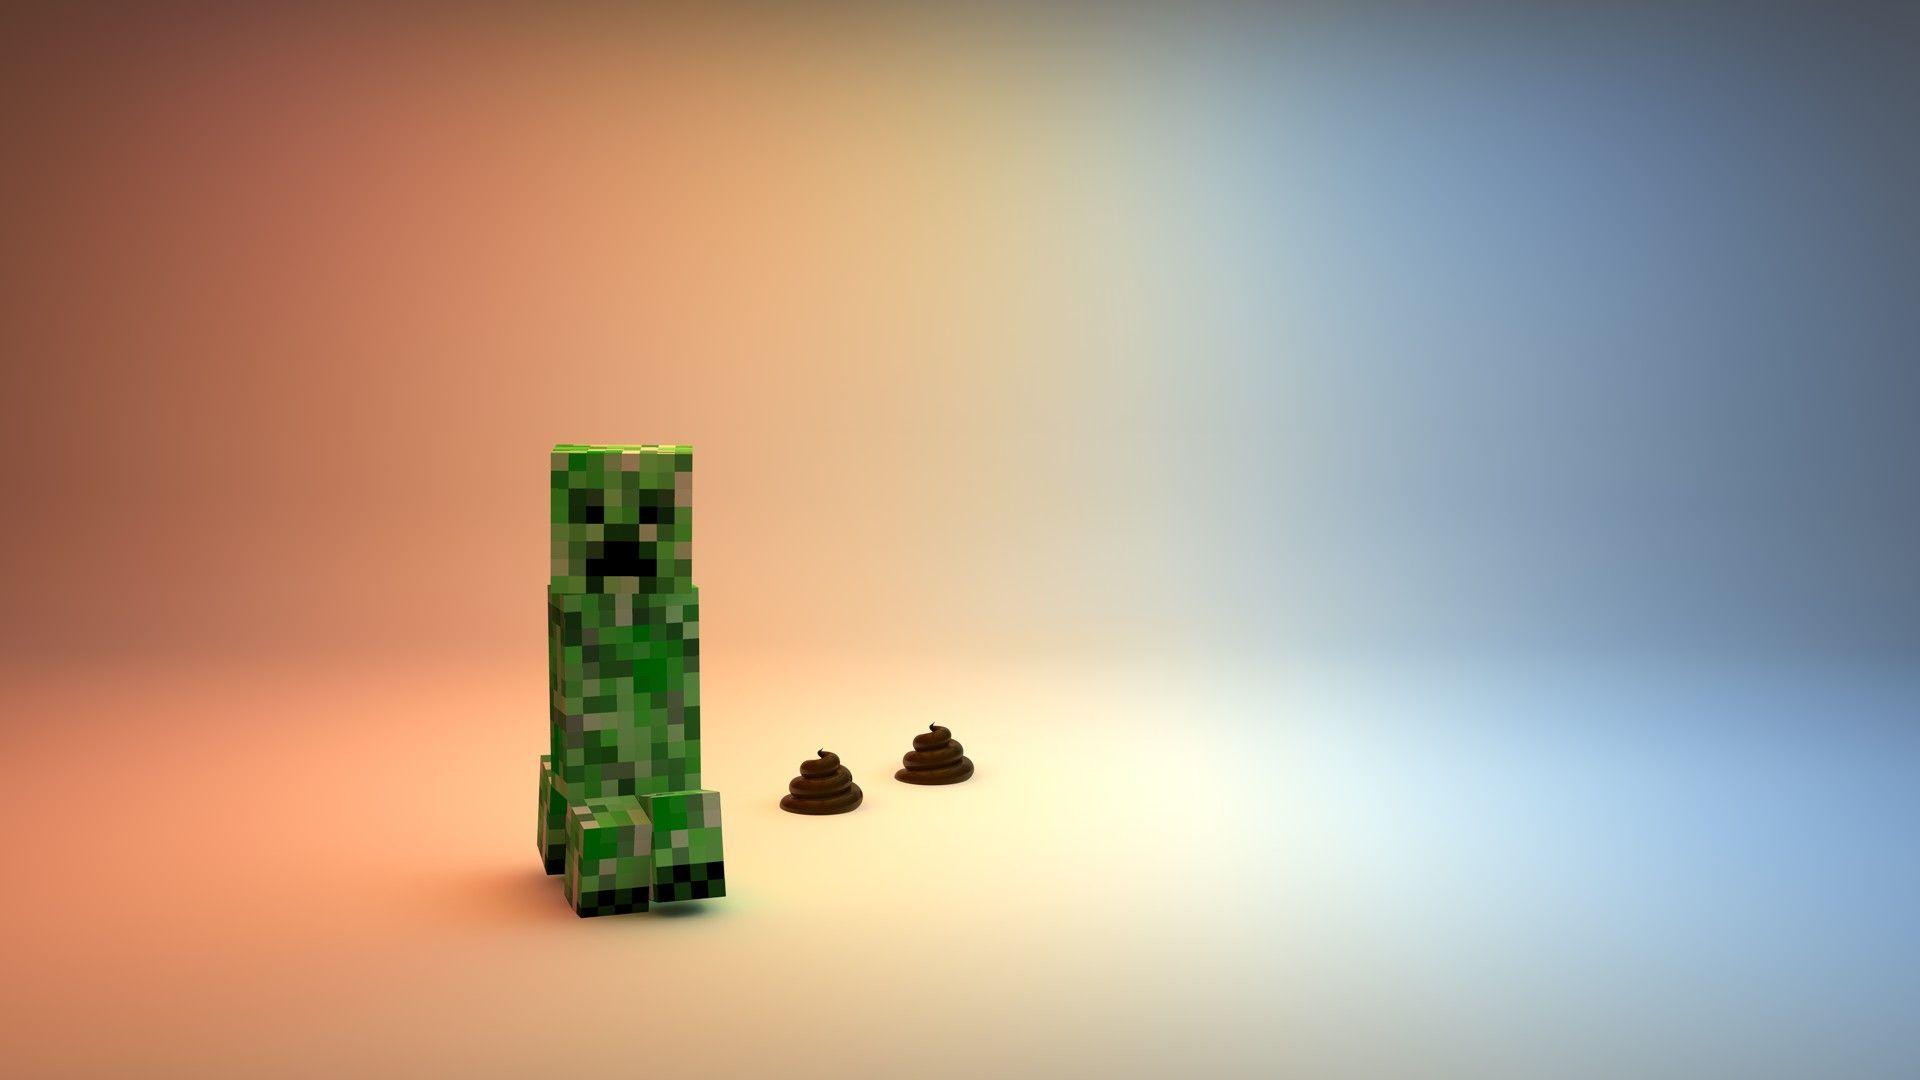 Creeper Minecraft Desktop For PC Other Games Wallpaper Res